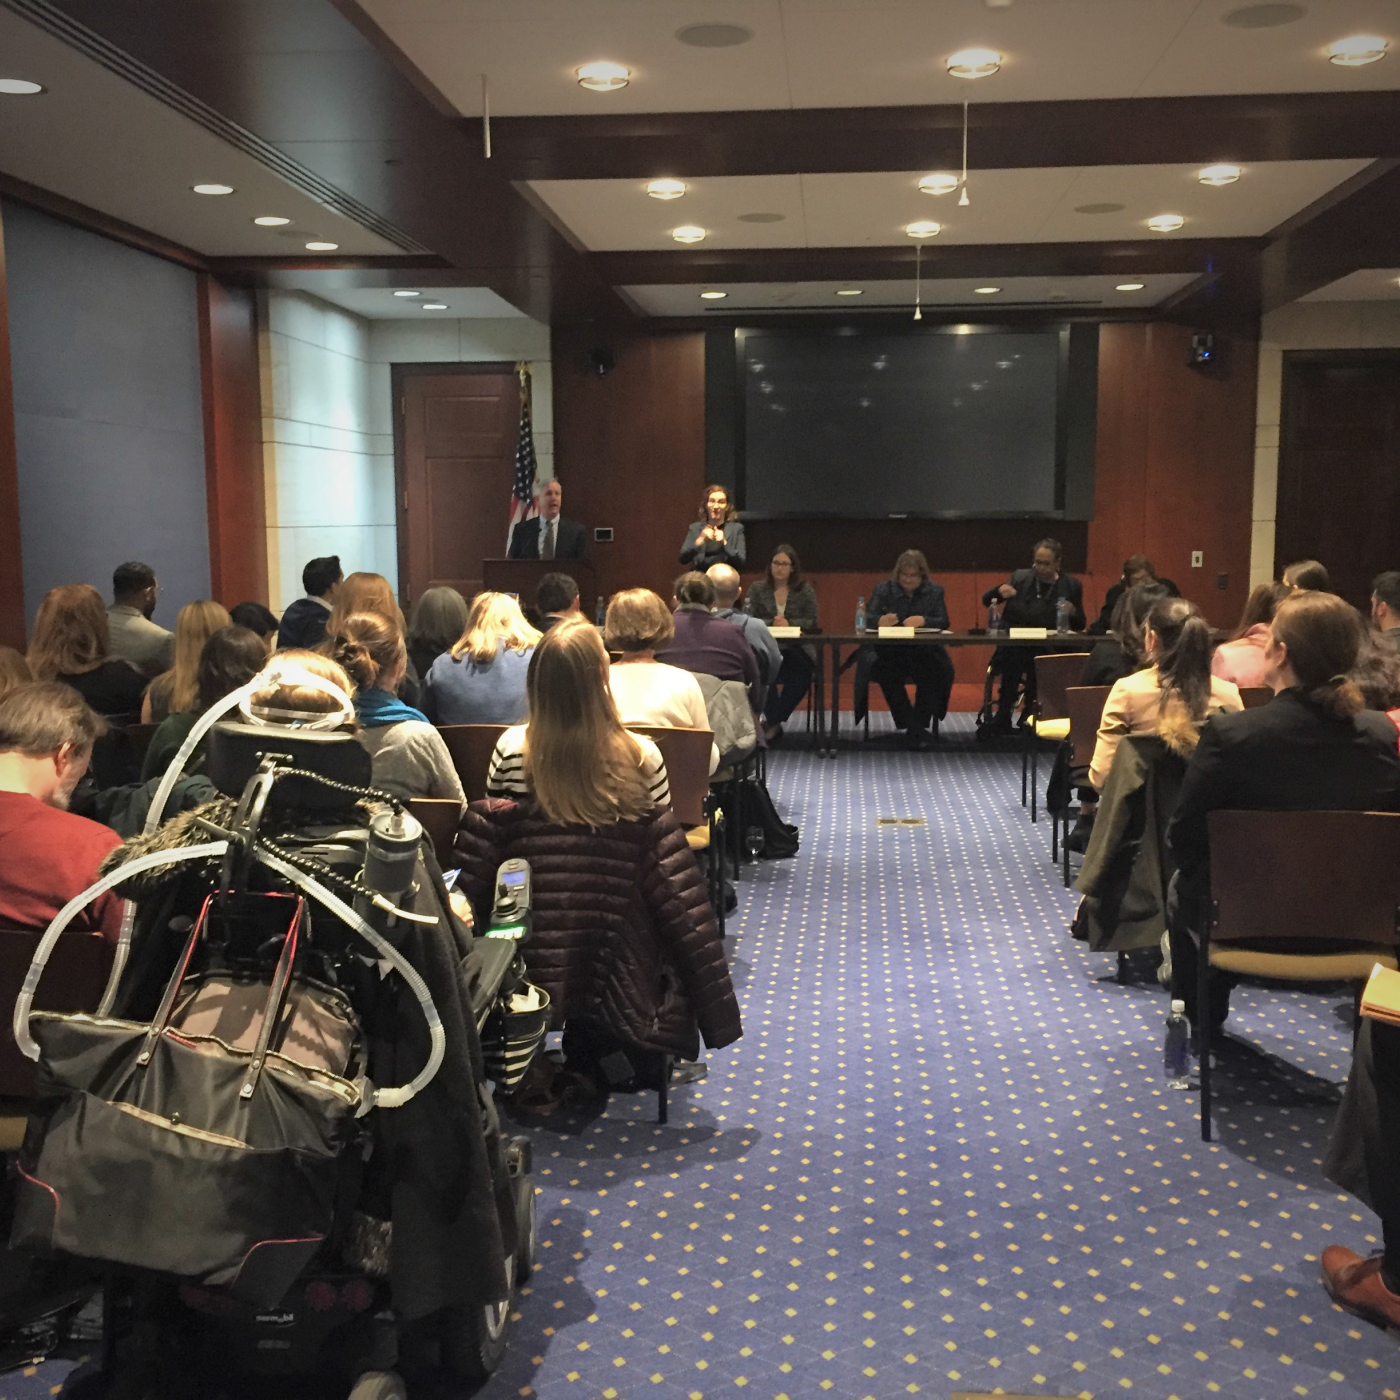 Attendees listen to remarks by panelists during an event co-hosted by IFES and USICD on Captiol Hill